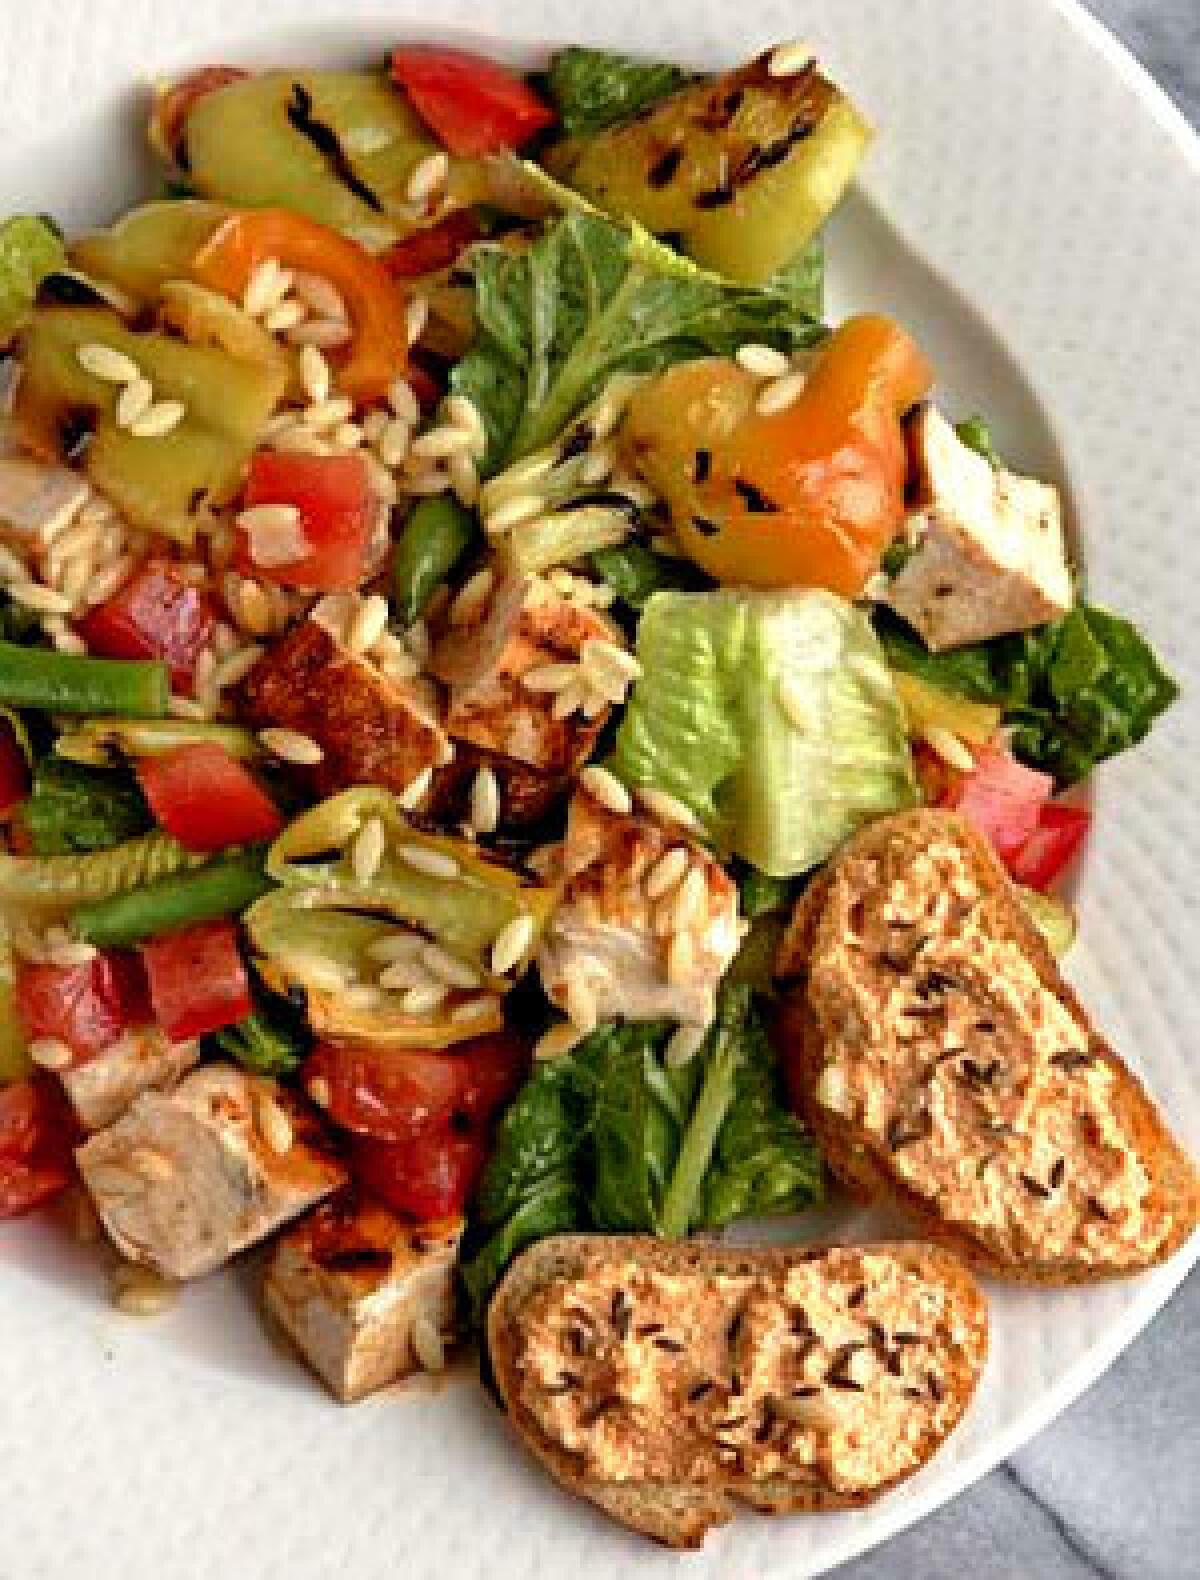 TOSSED: Grilled Hungarians gain a smoky sweetness that gives definition to chicken salad.